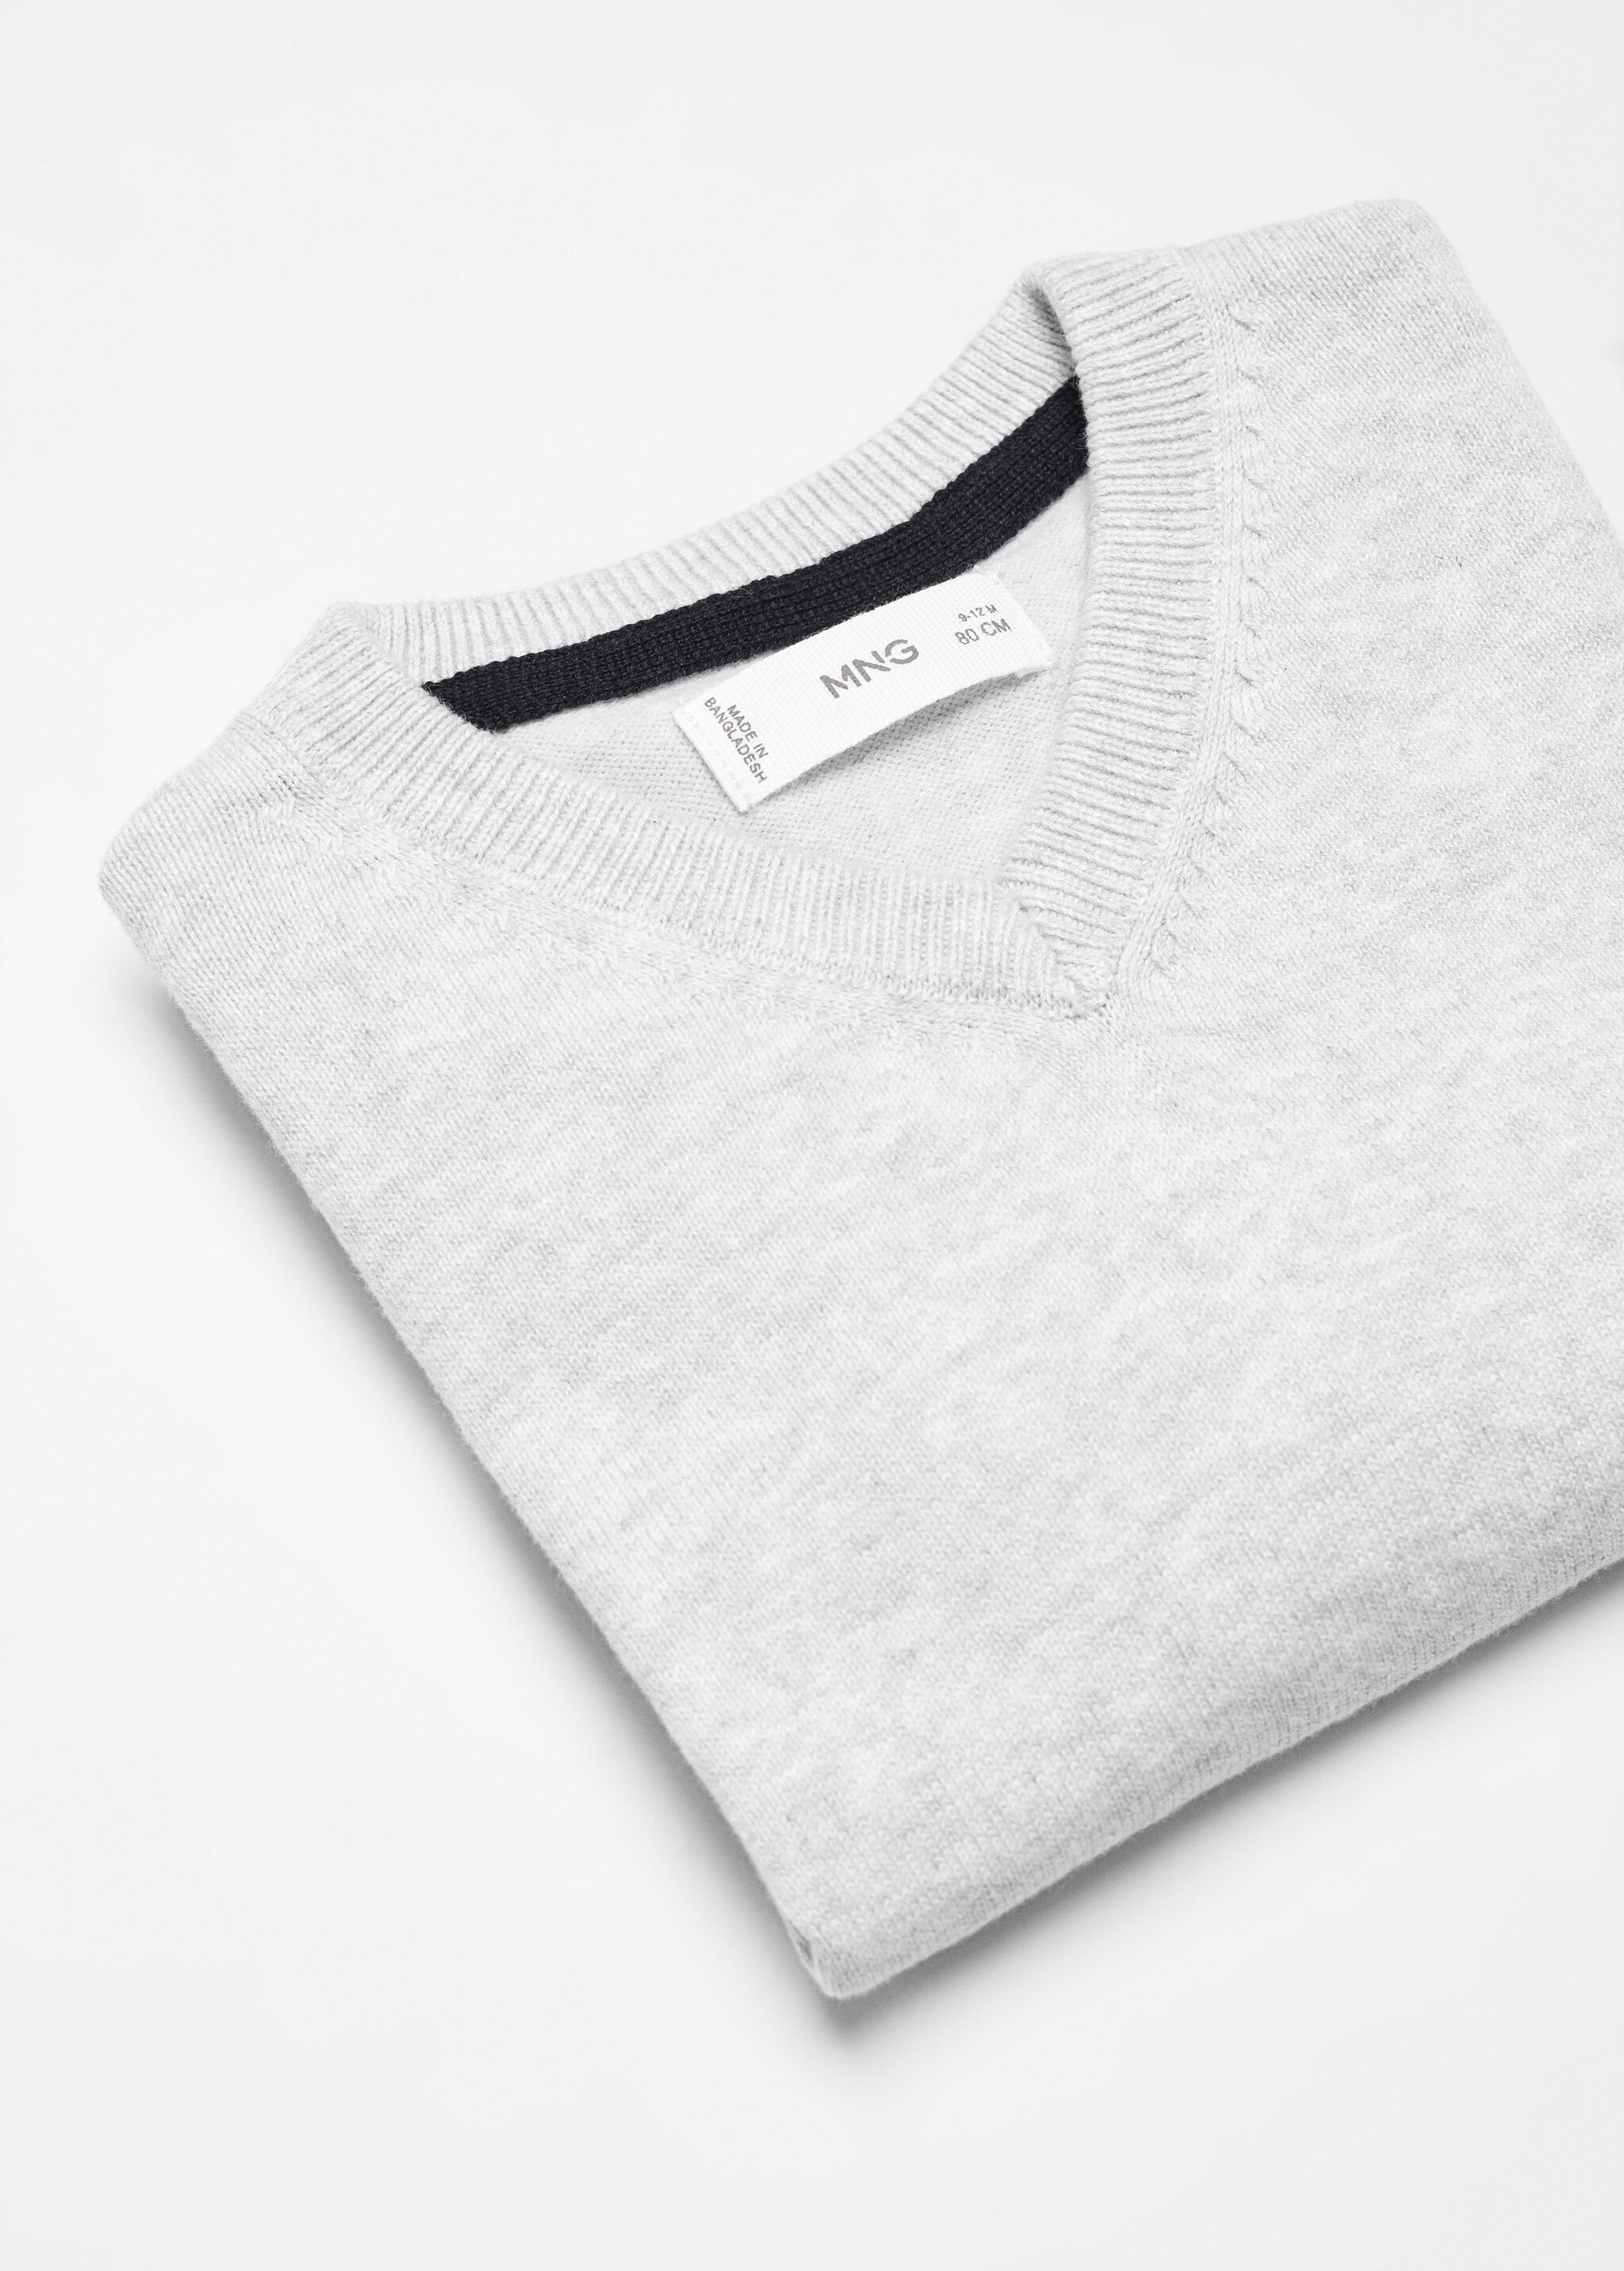 V-neck sweater - Details of the article 0